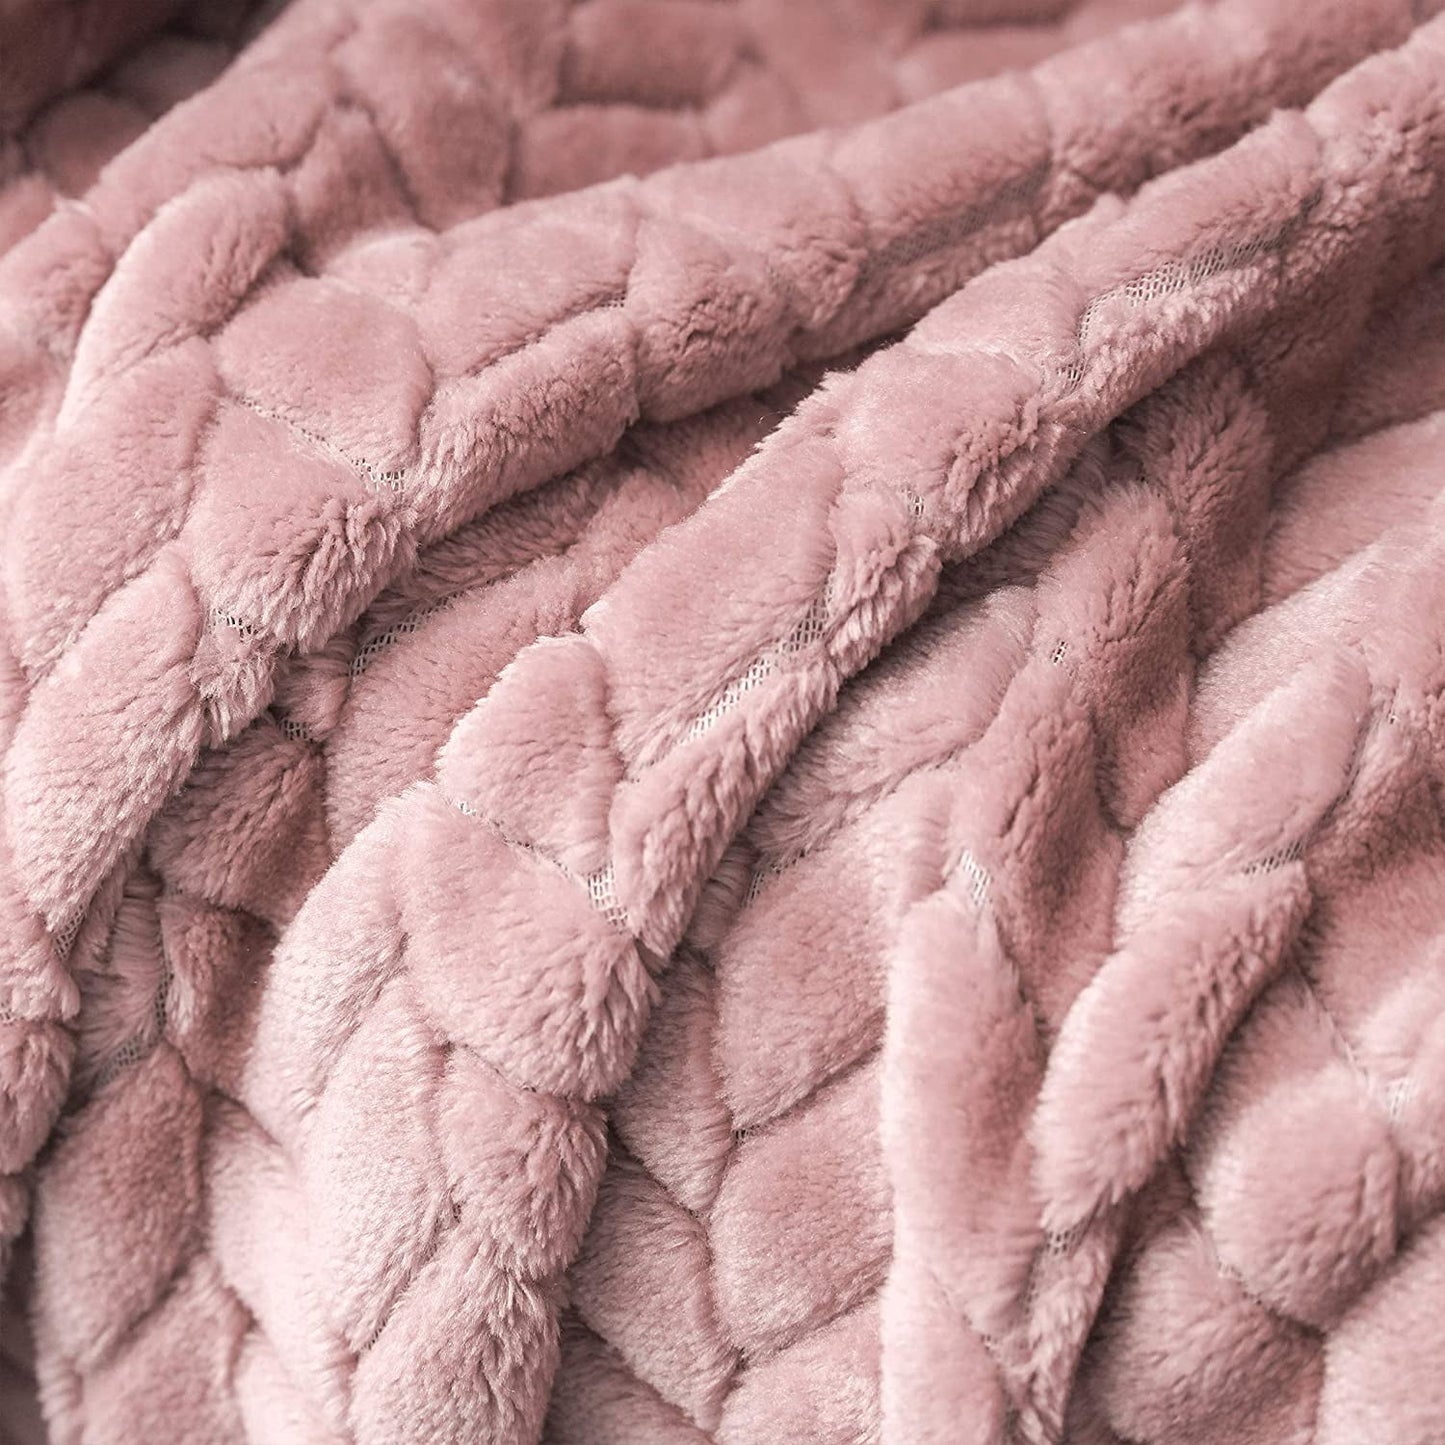 Exclusivo Mezcla Large Flannel Fleece Throw Blanket, Jacquard Weave Leaves Pattern (50" x 70", Pink) - Soft, Warm, Lightweight and Decorative